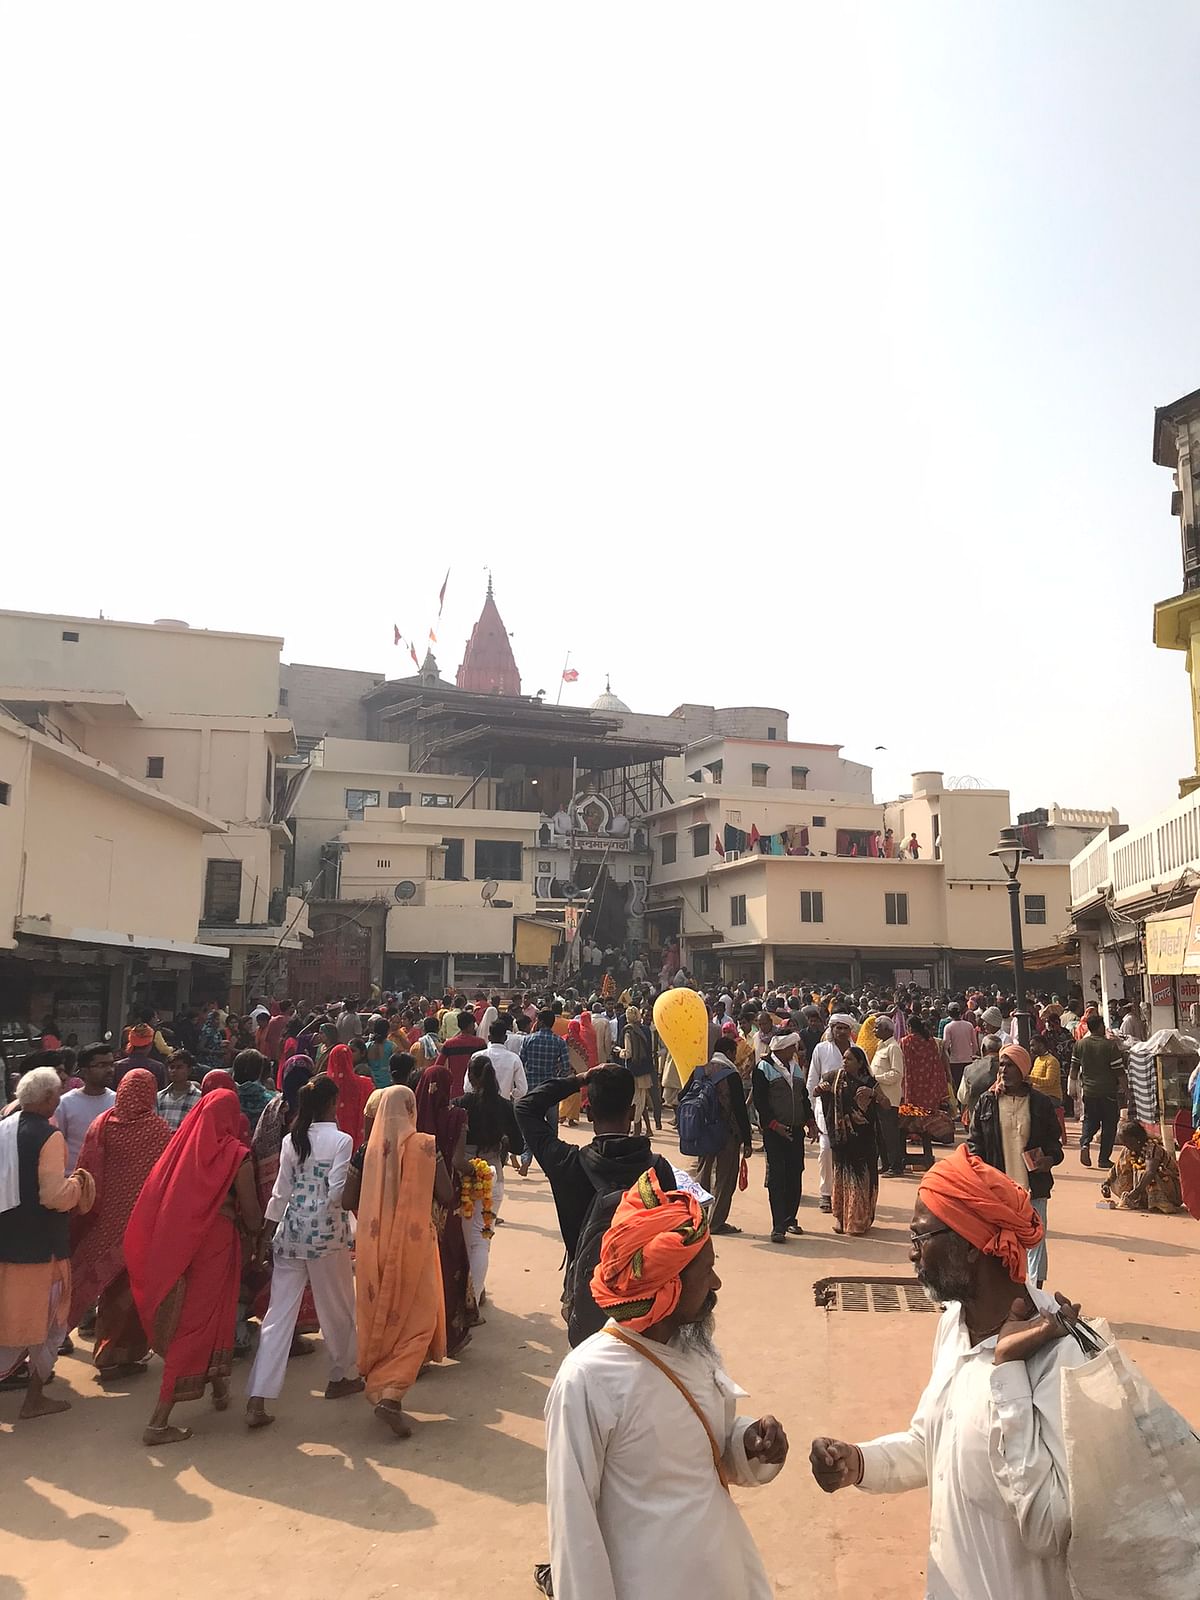 Pilgrims, many of whom are not affluent, seen in Ayodhya.